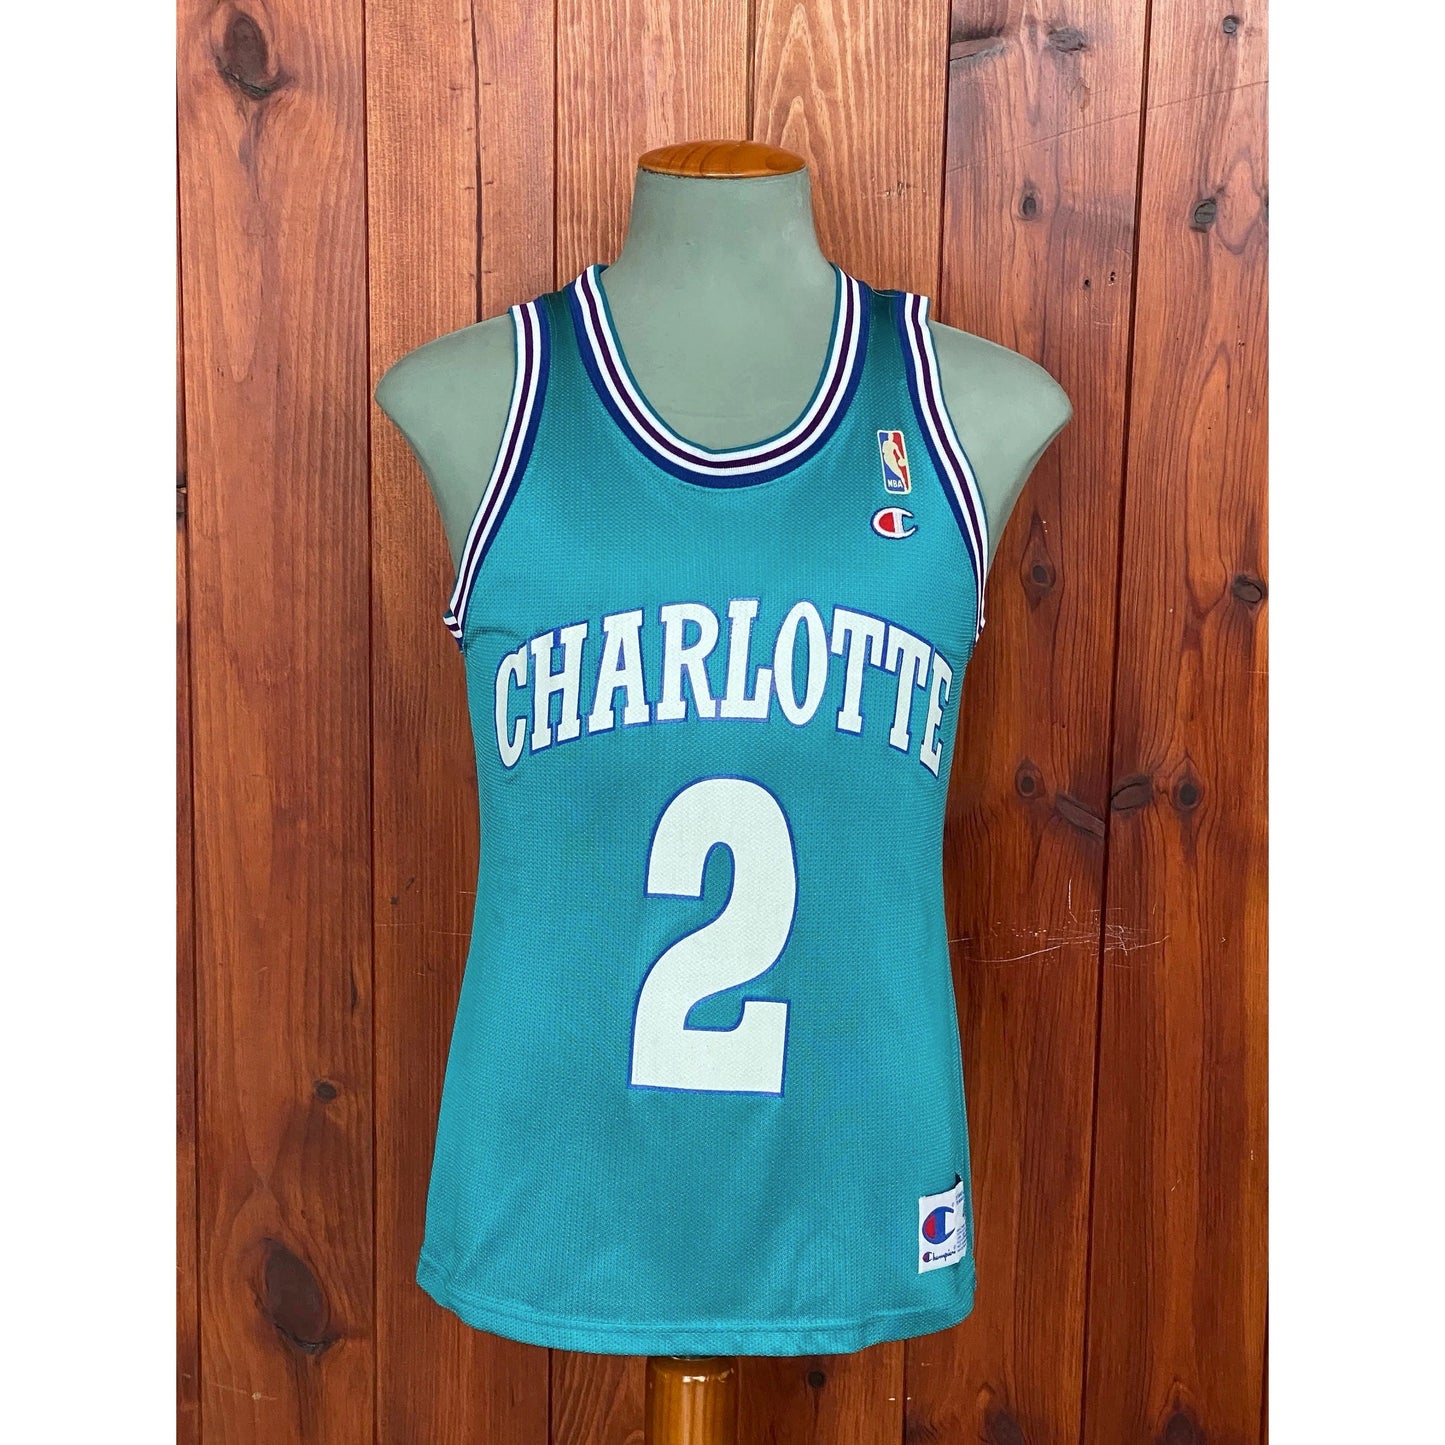 Authentic NBA Jersey - #2 Johnson Charlotte Hornets - Size 40, Made in USA by Champion